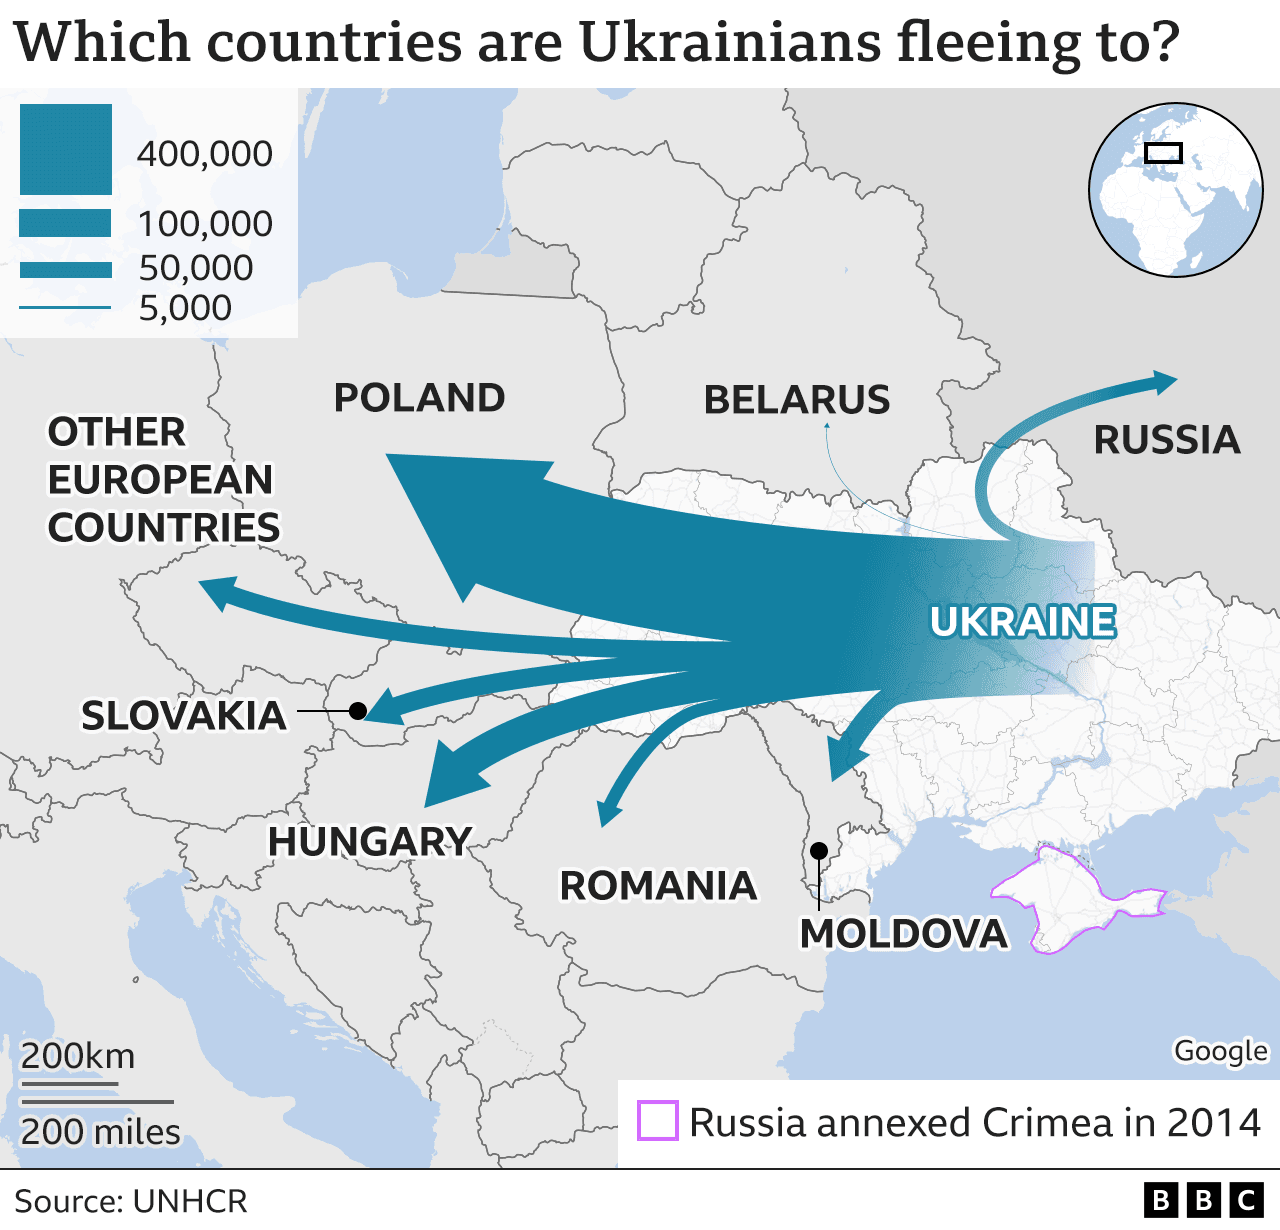 Map showing which countries Ukrainian refugees are fleeing to